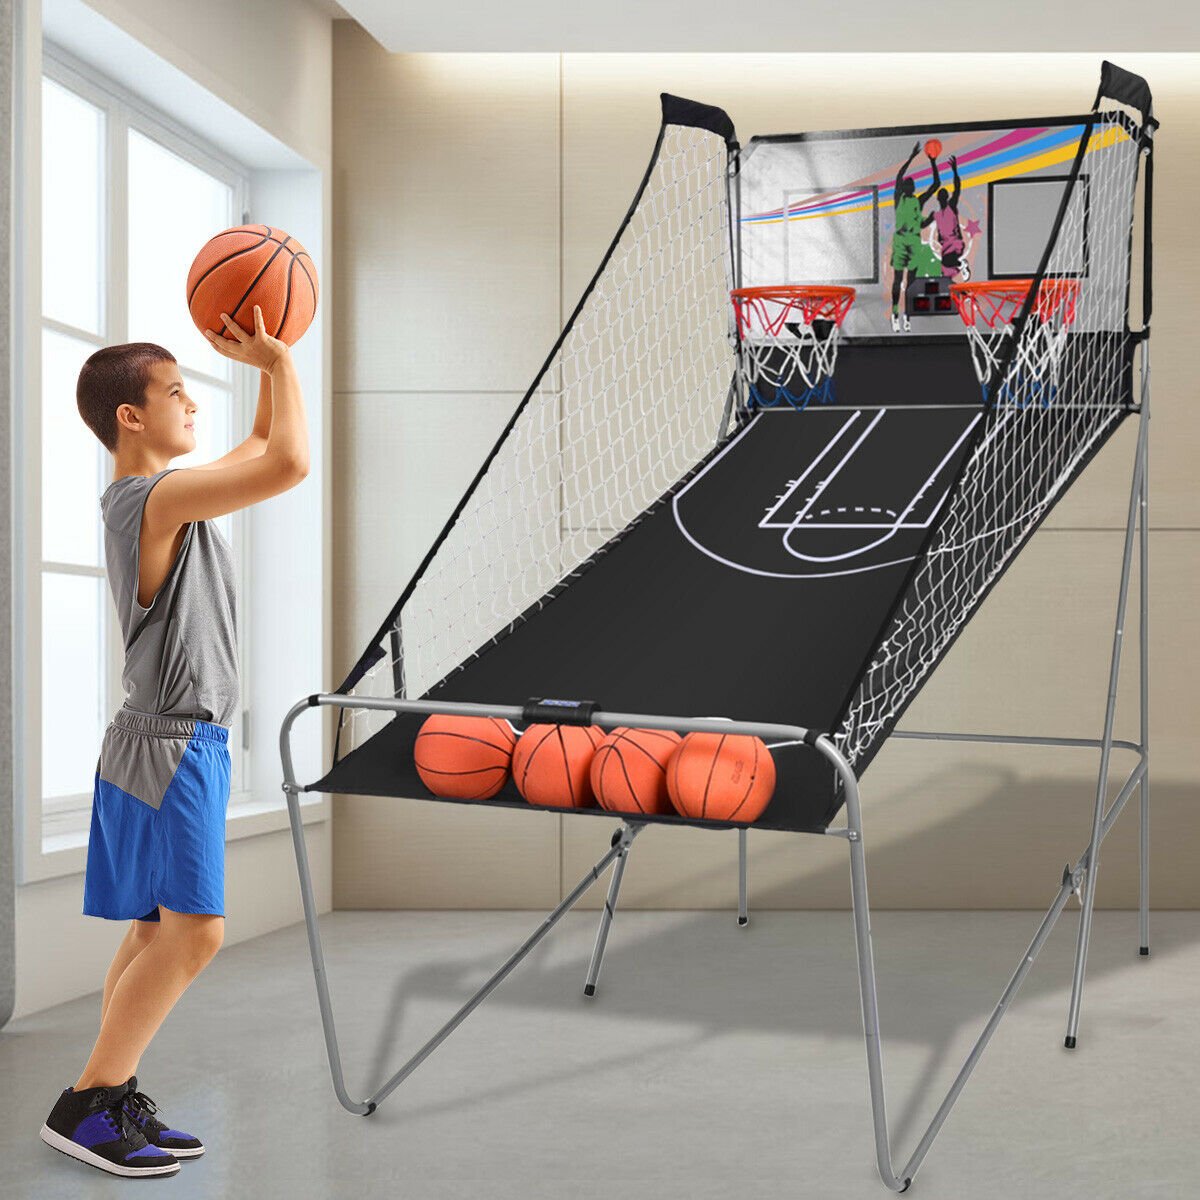 Enhance Indoor Playtime with the Arcade Basketball Hoop Game